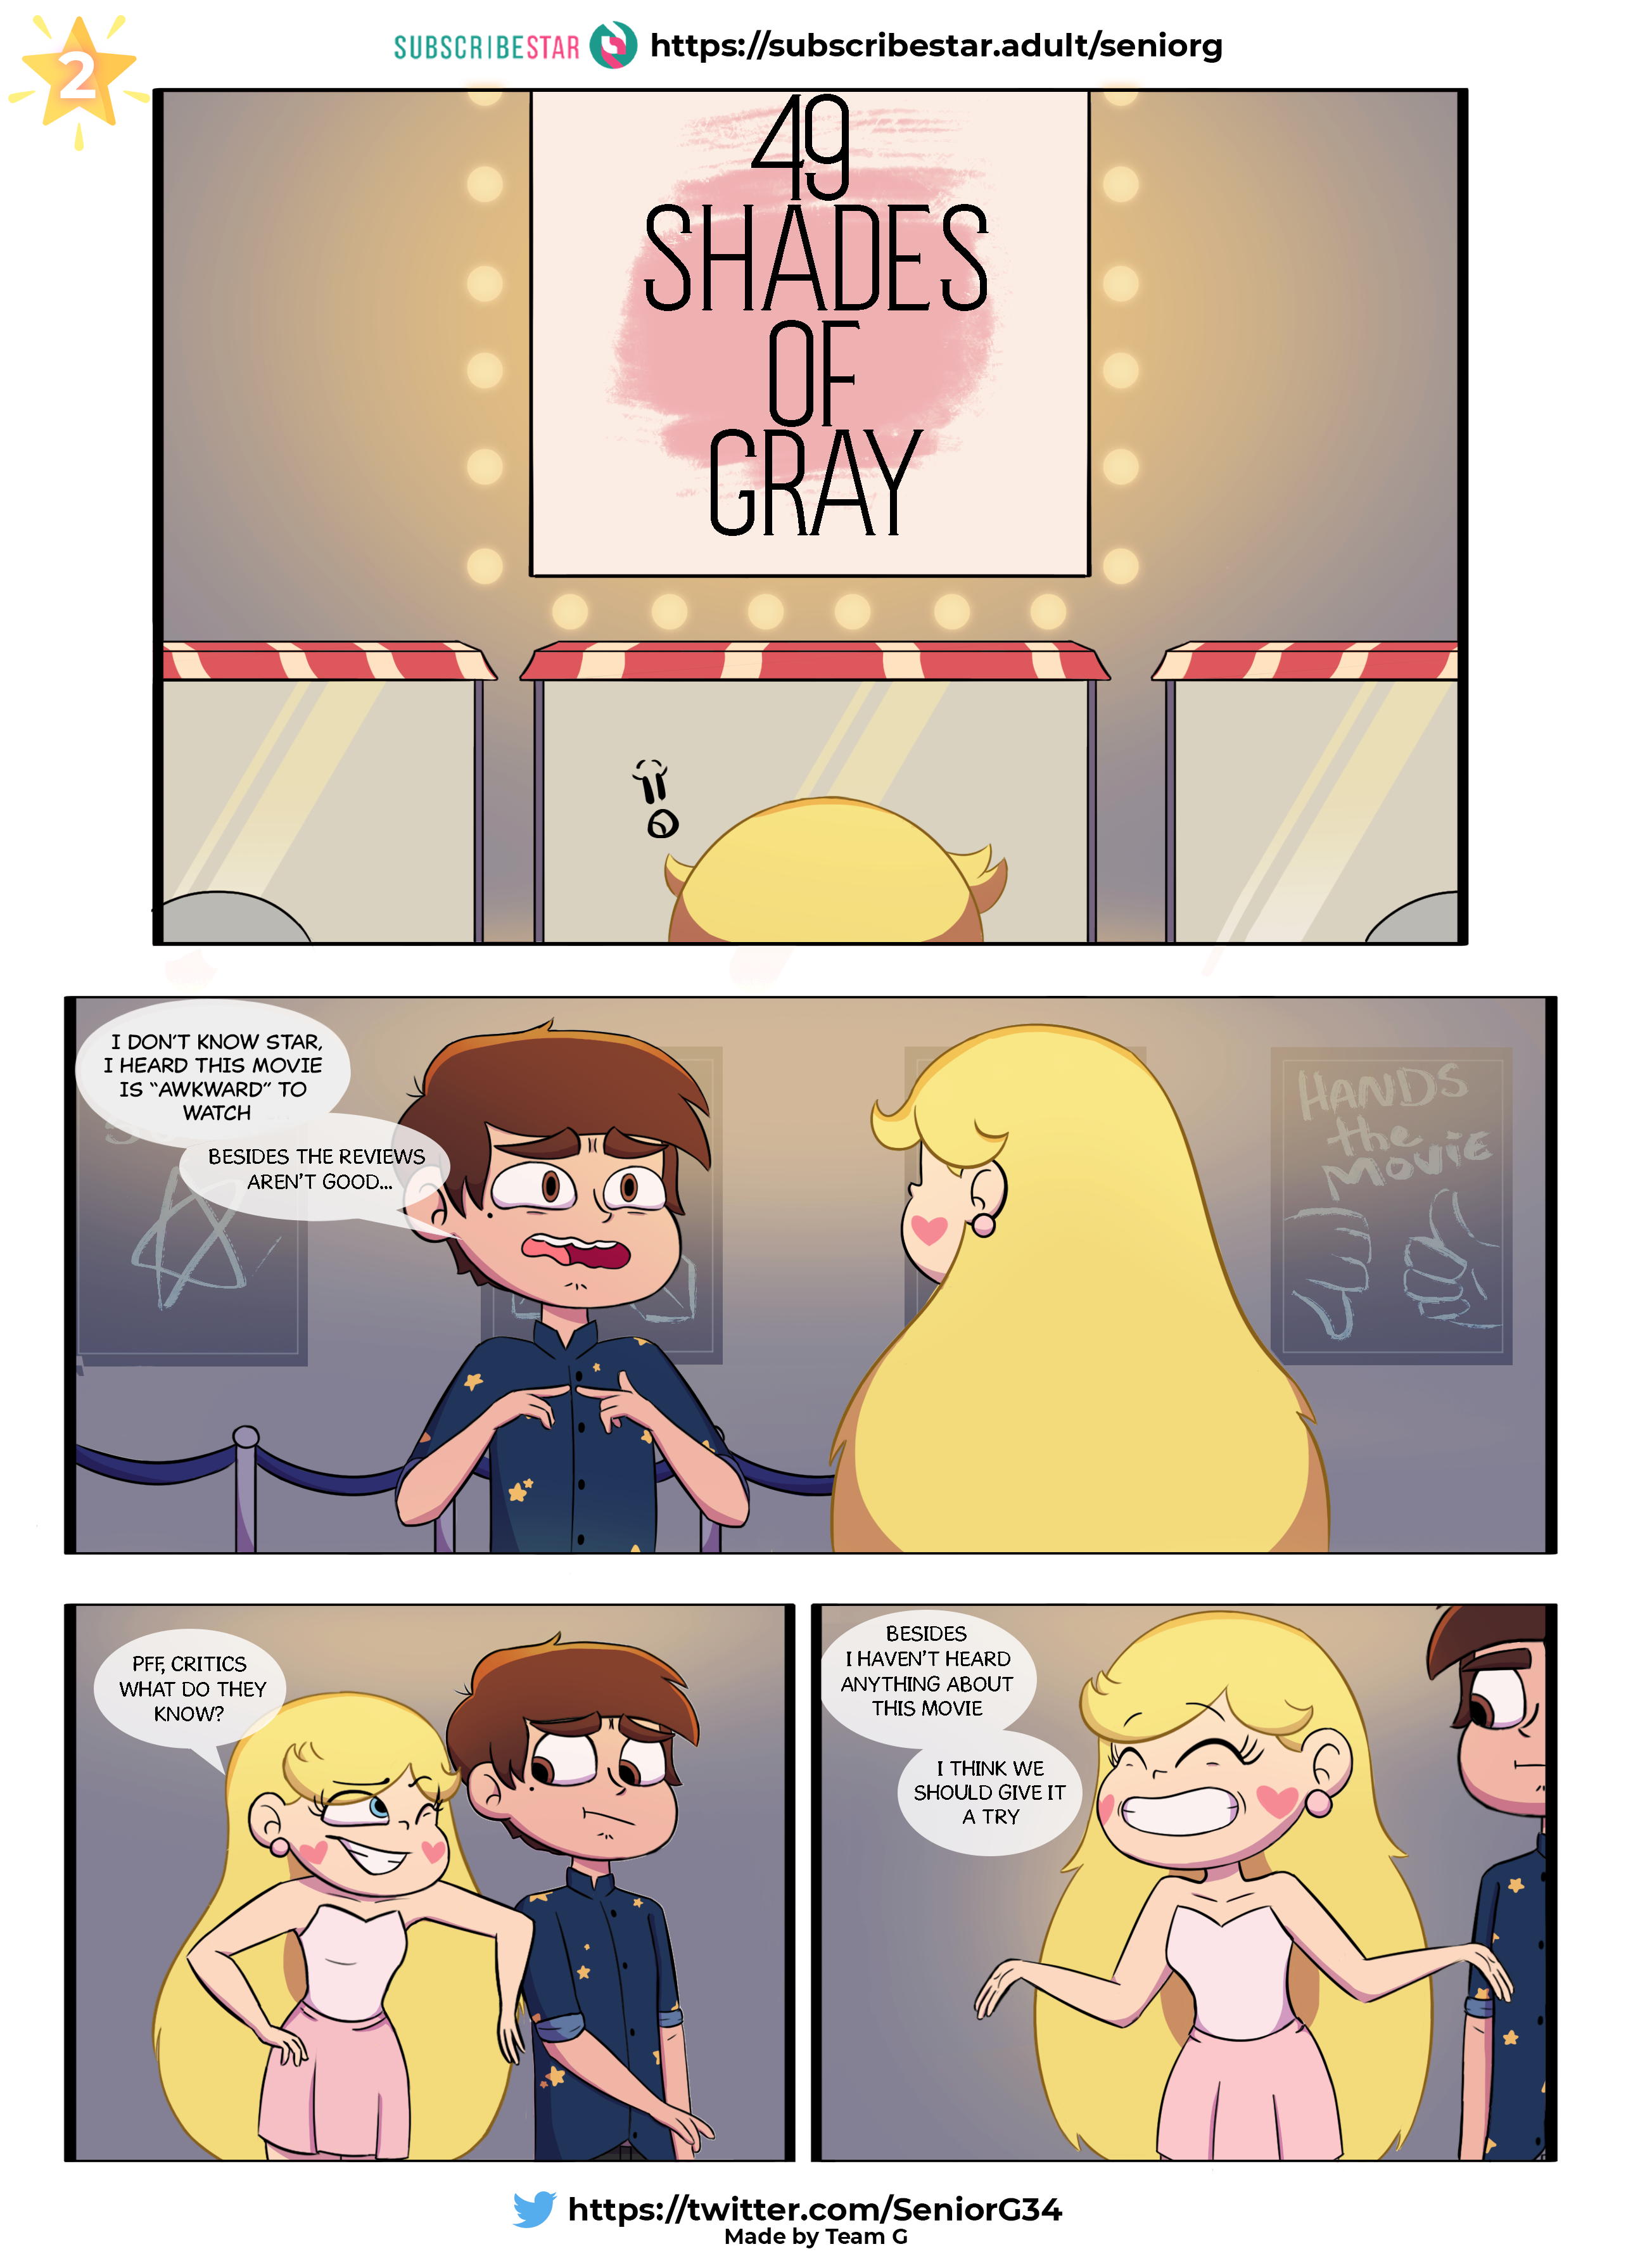 Star vs the forces of evil porn comic